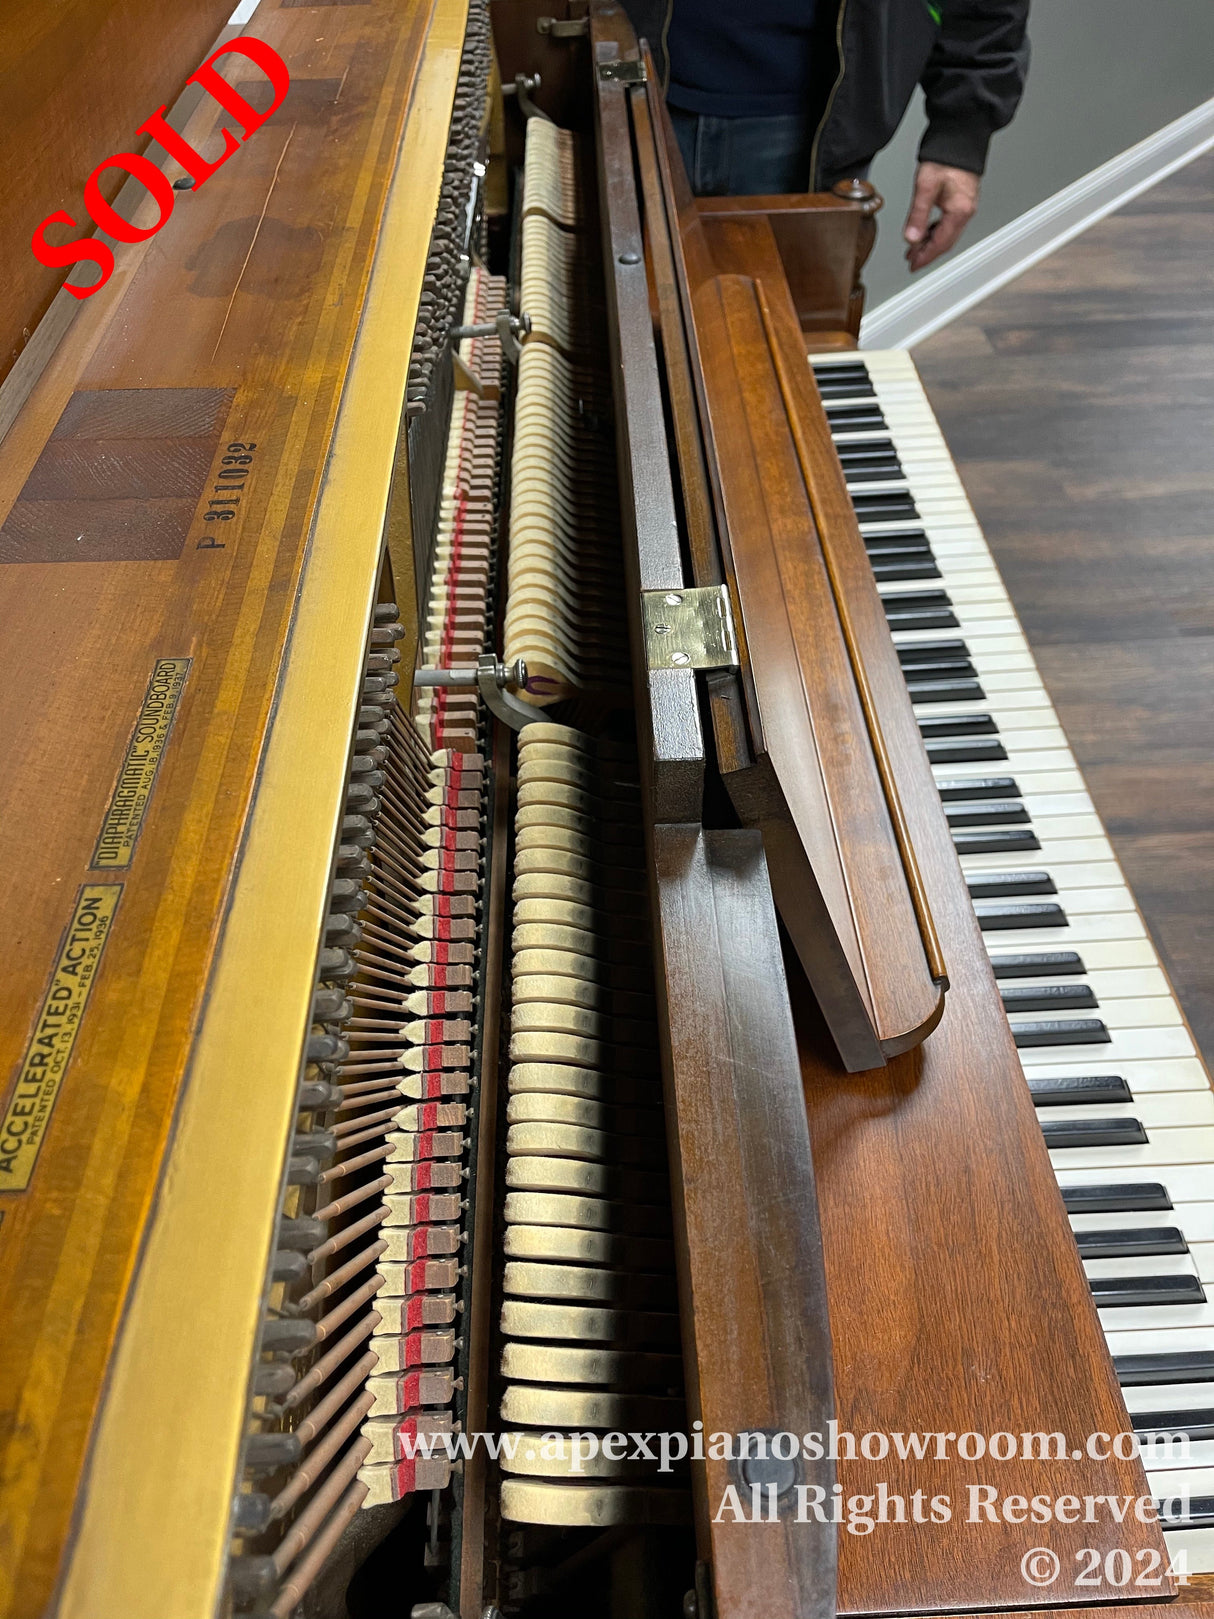 Interior of an upright piano showing the hammers and strings, with the piano’s front panel removed, positioned next to the keyboard, in a showroom setting.